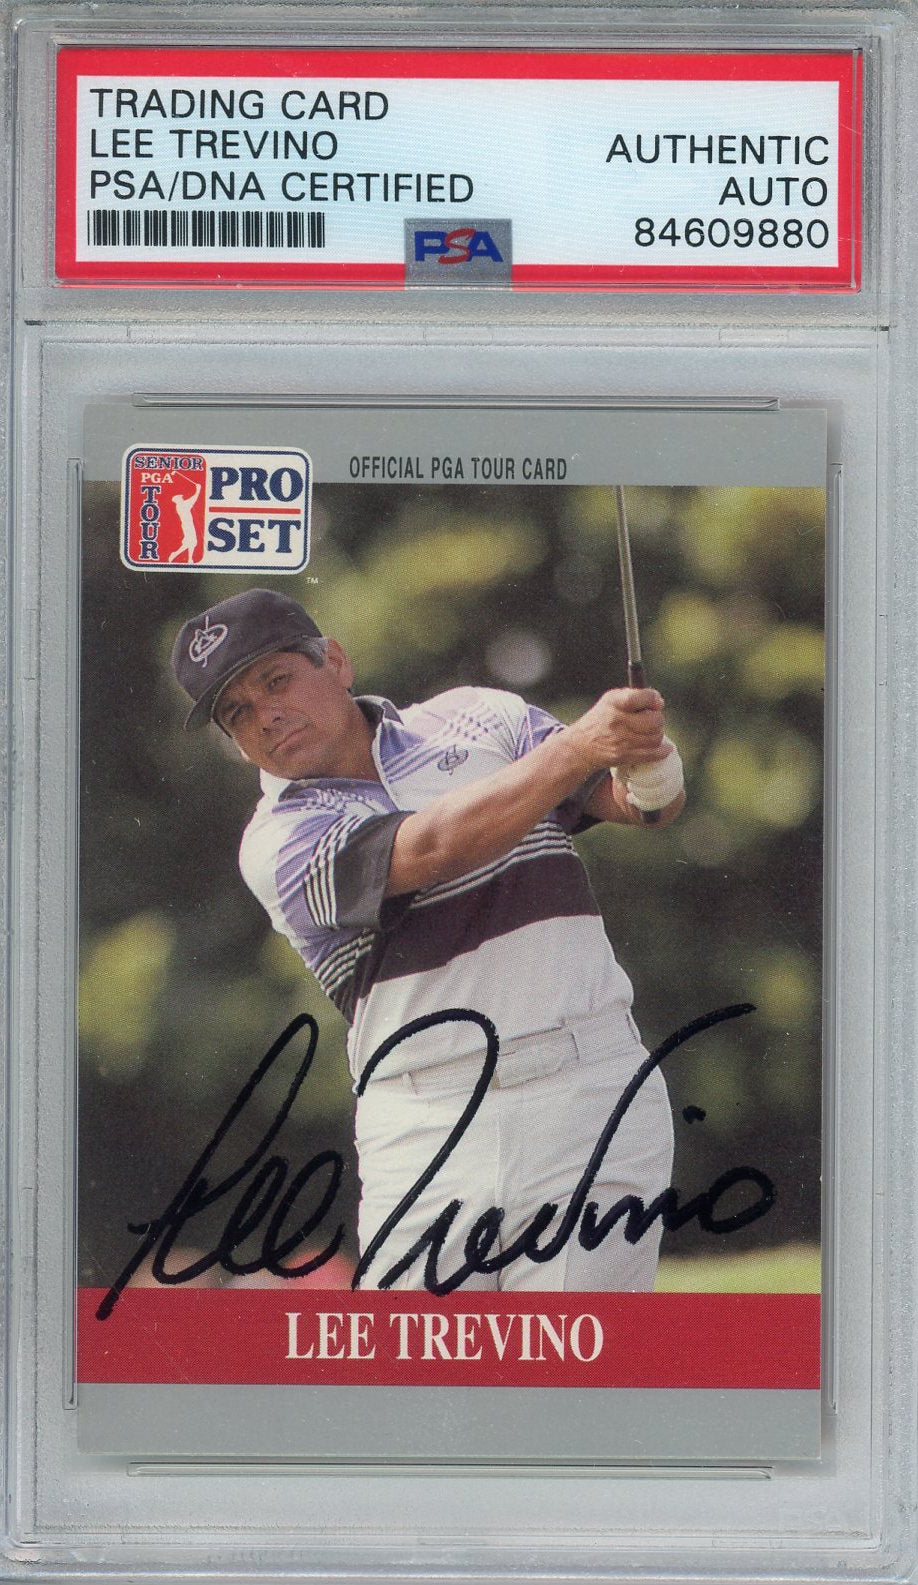 LEE TREVINO SIGNED PSA/DNA CERTIFIED AUTHENTIC AUTOGRAPH CARD